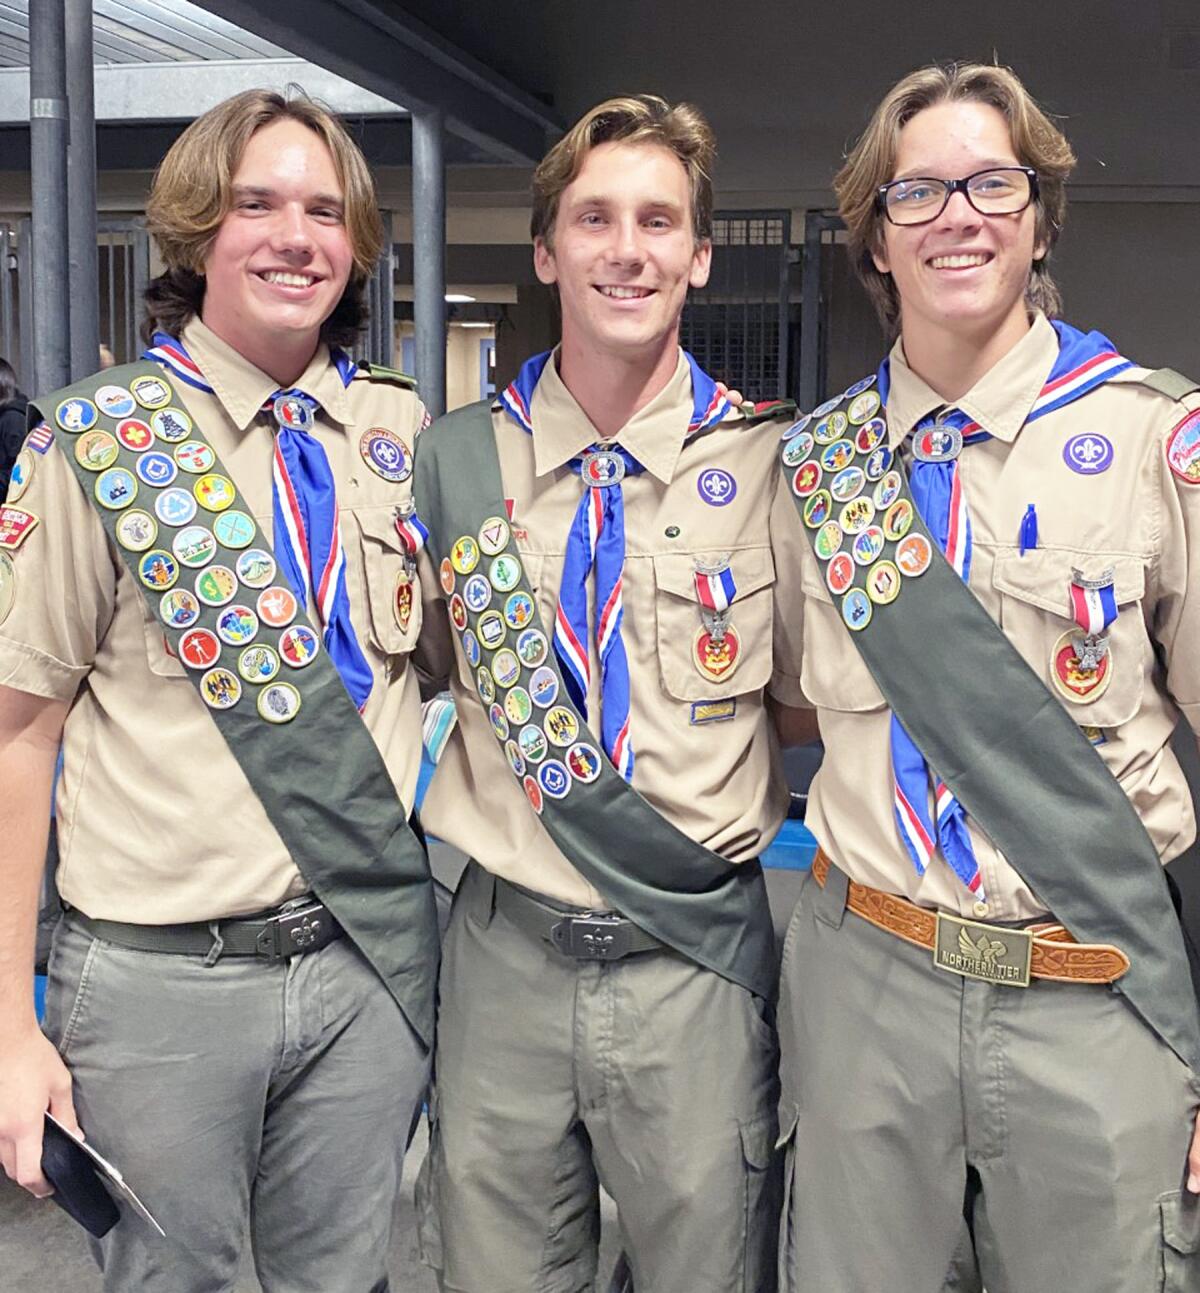 Eagle Scout trio honored